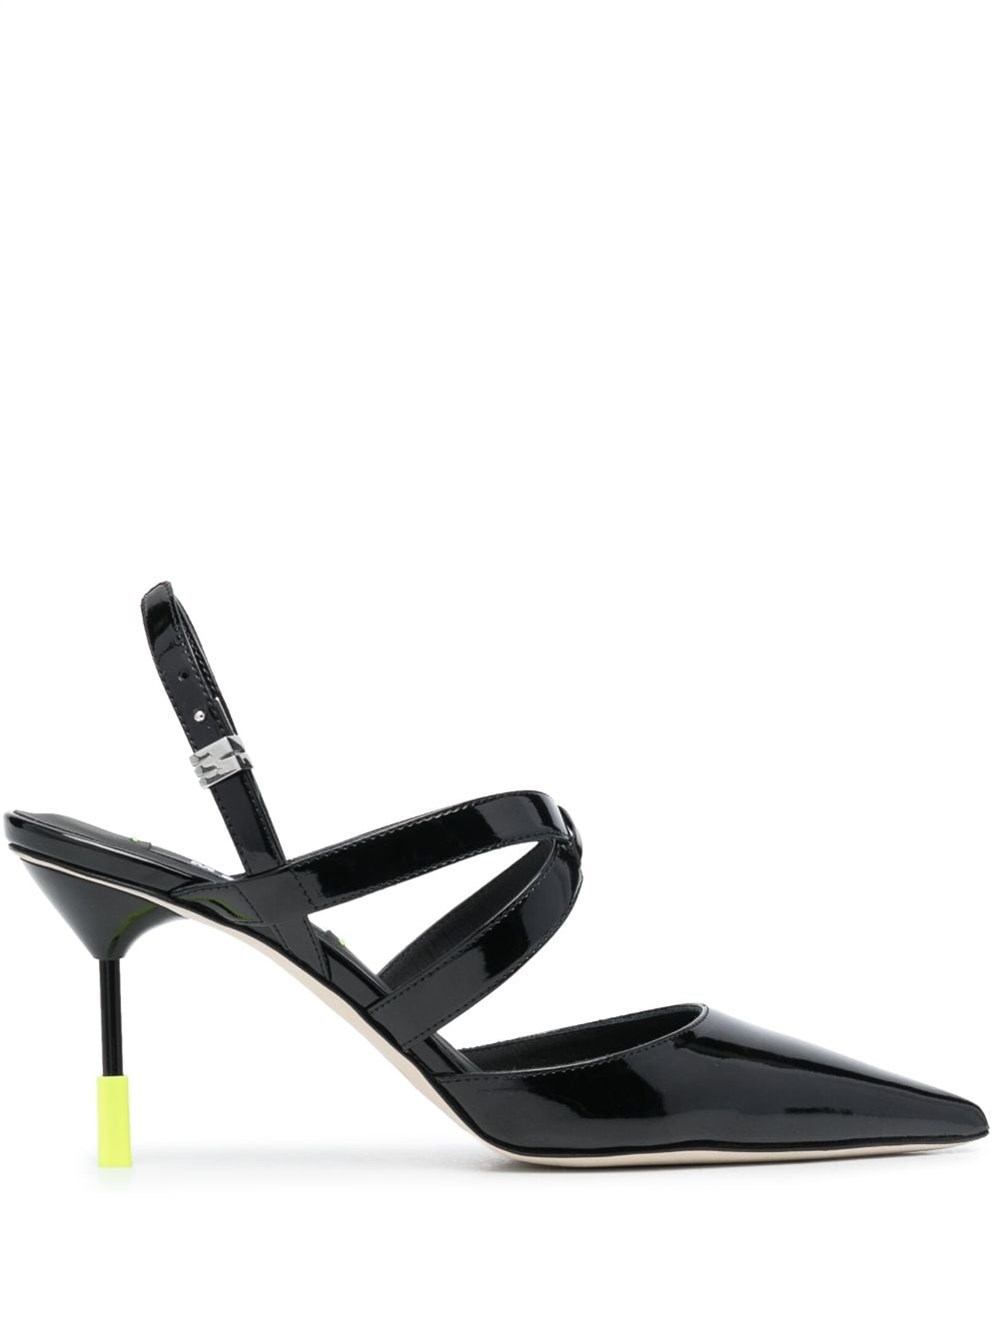 Msgm Patent Leather Pumps In Black  